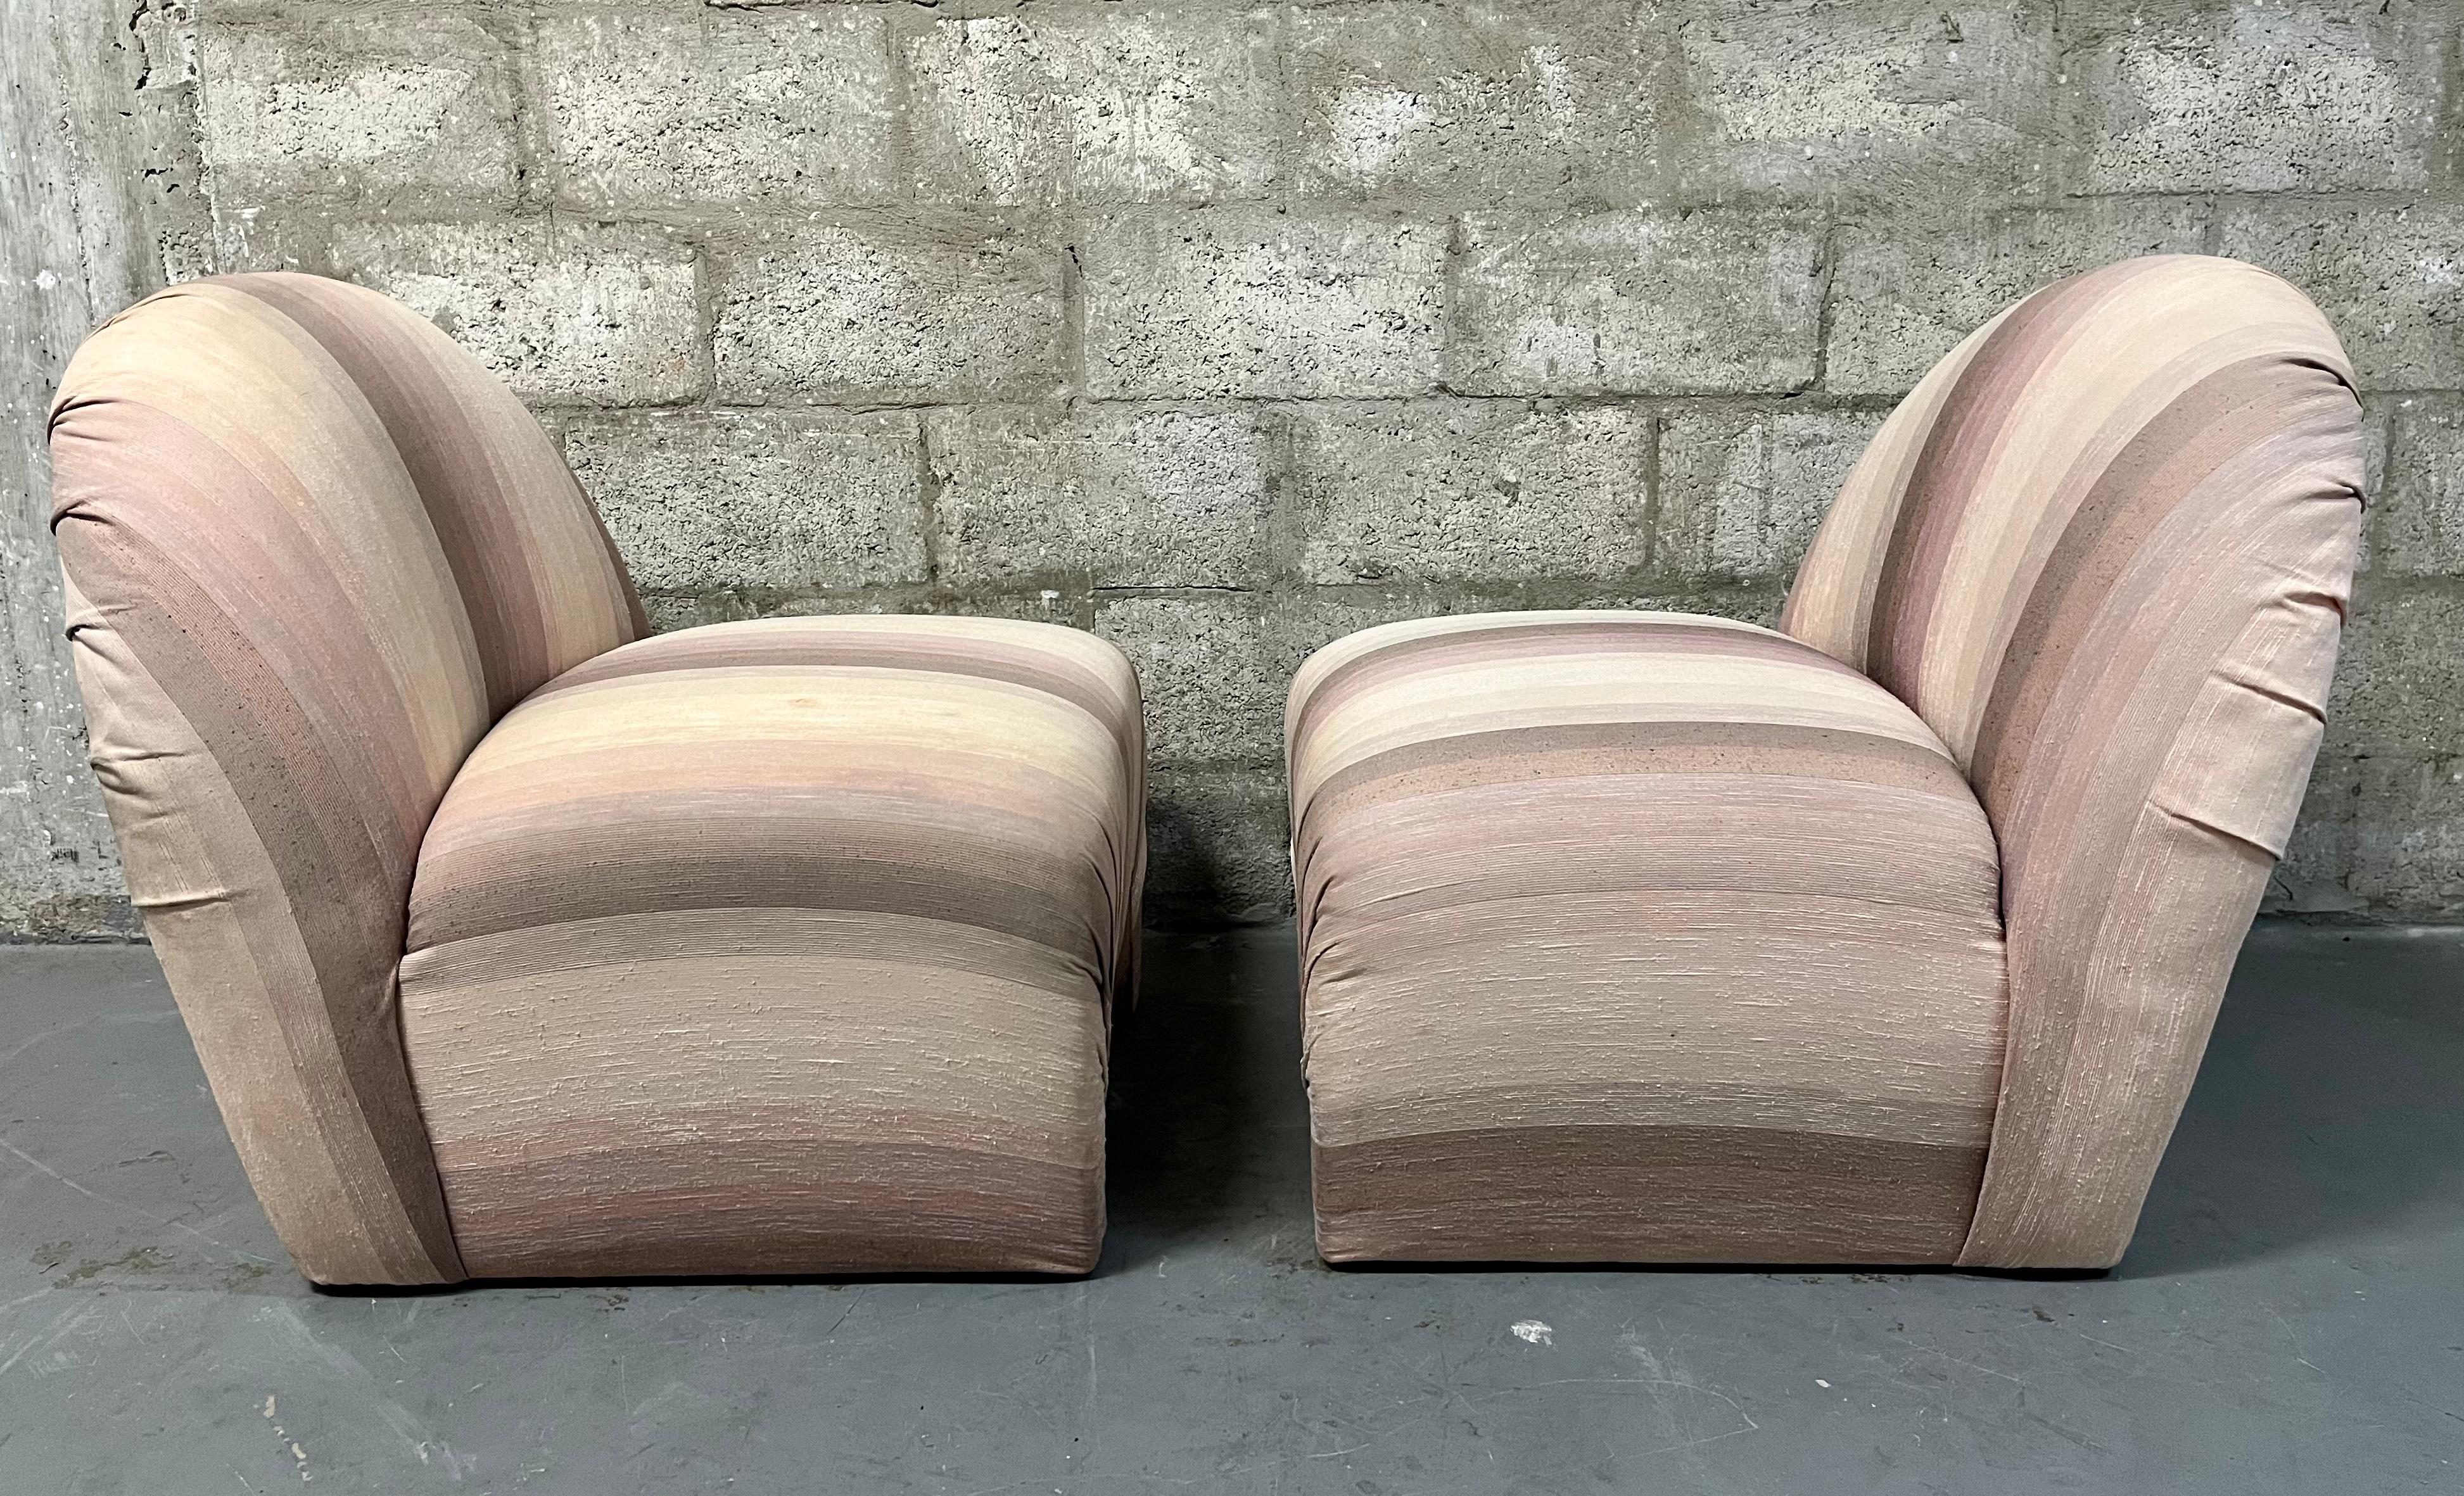 Late 20th Century A Pair of Lounge Chairs in the Vladimir Kagan for Weiman Style. Circa 1980s